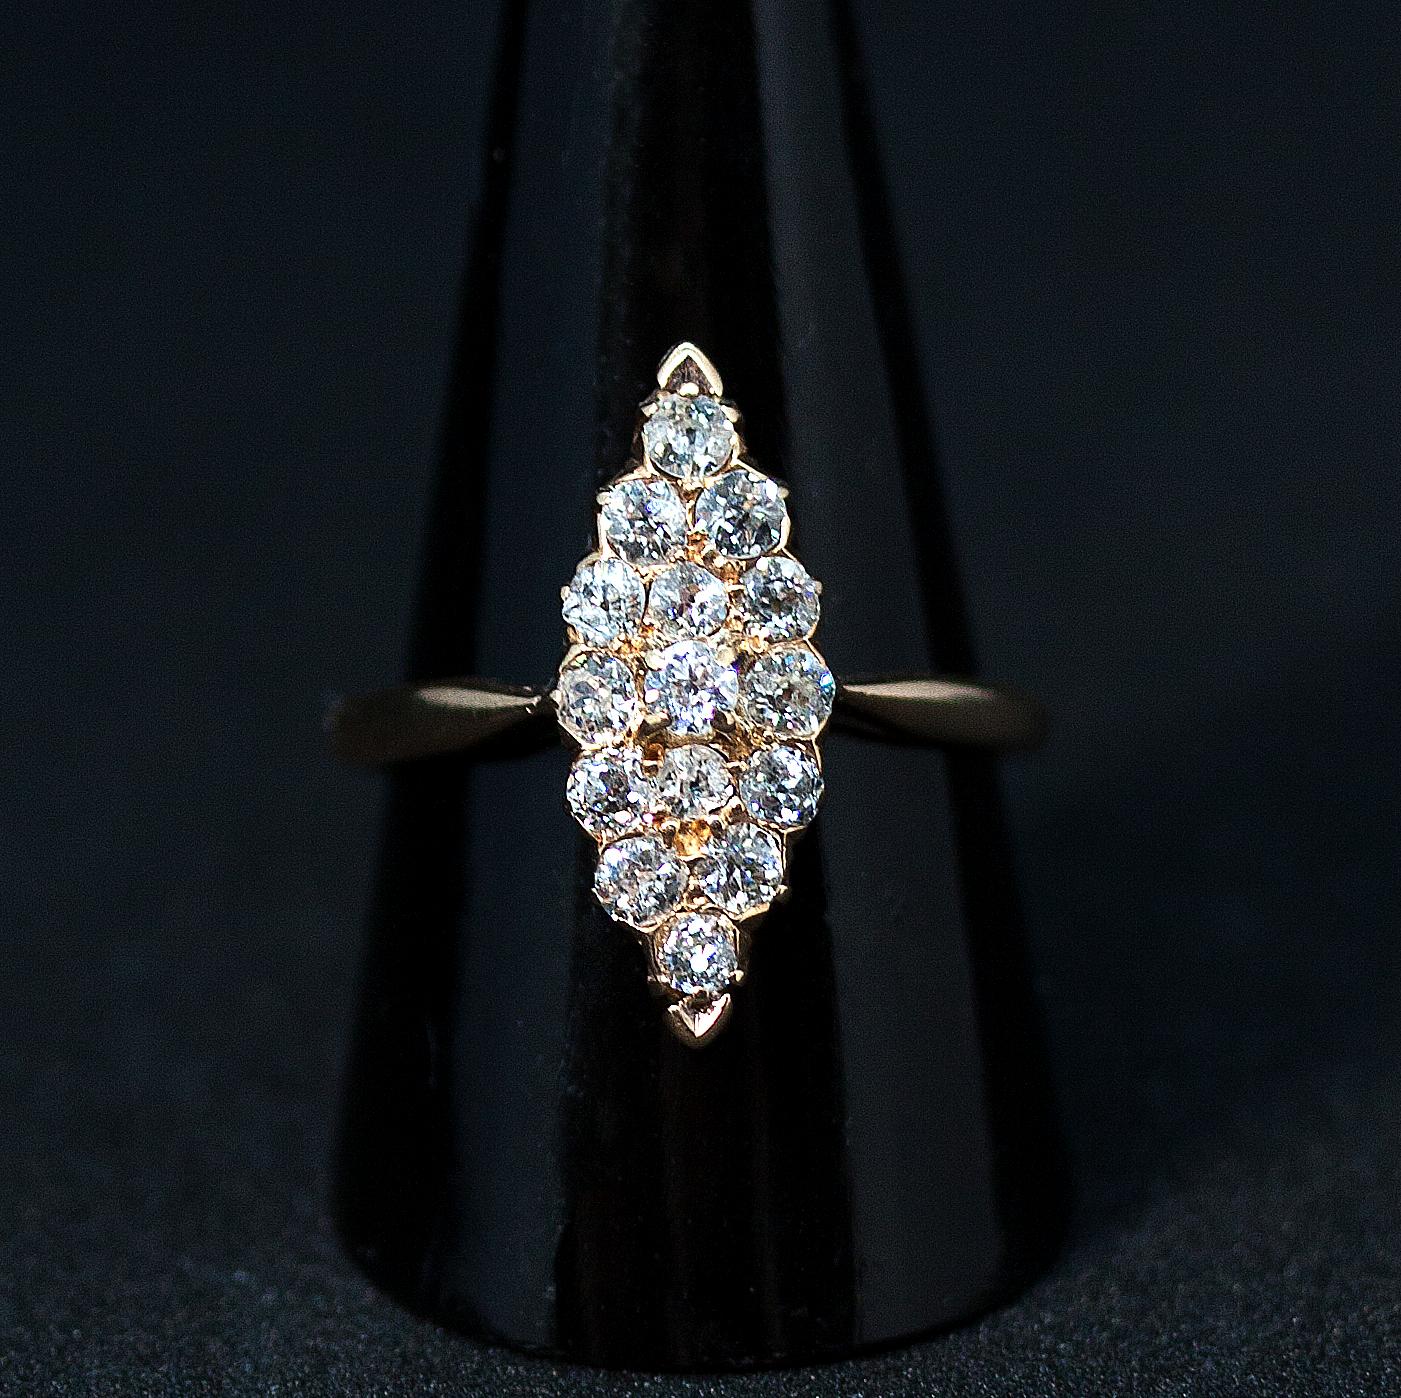 Antique navette-shaped old brilliant-cut diamond ring, fifteen old brilliant-cut diamonds in a cluster, all diamonds estimated to 
weigh a total of 0.75 carats, claw set in a rose gold mount.
 
Austria, circa 1920

head measuring  2.0 x 0.8 cm  / 